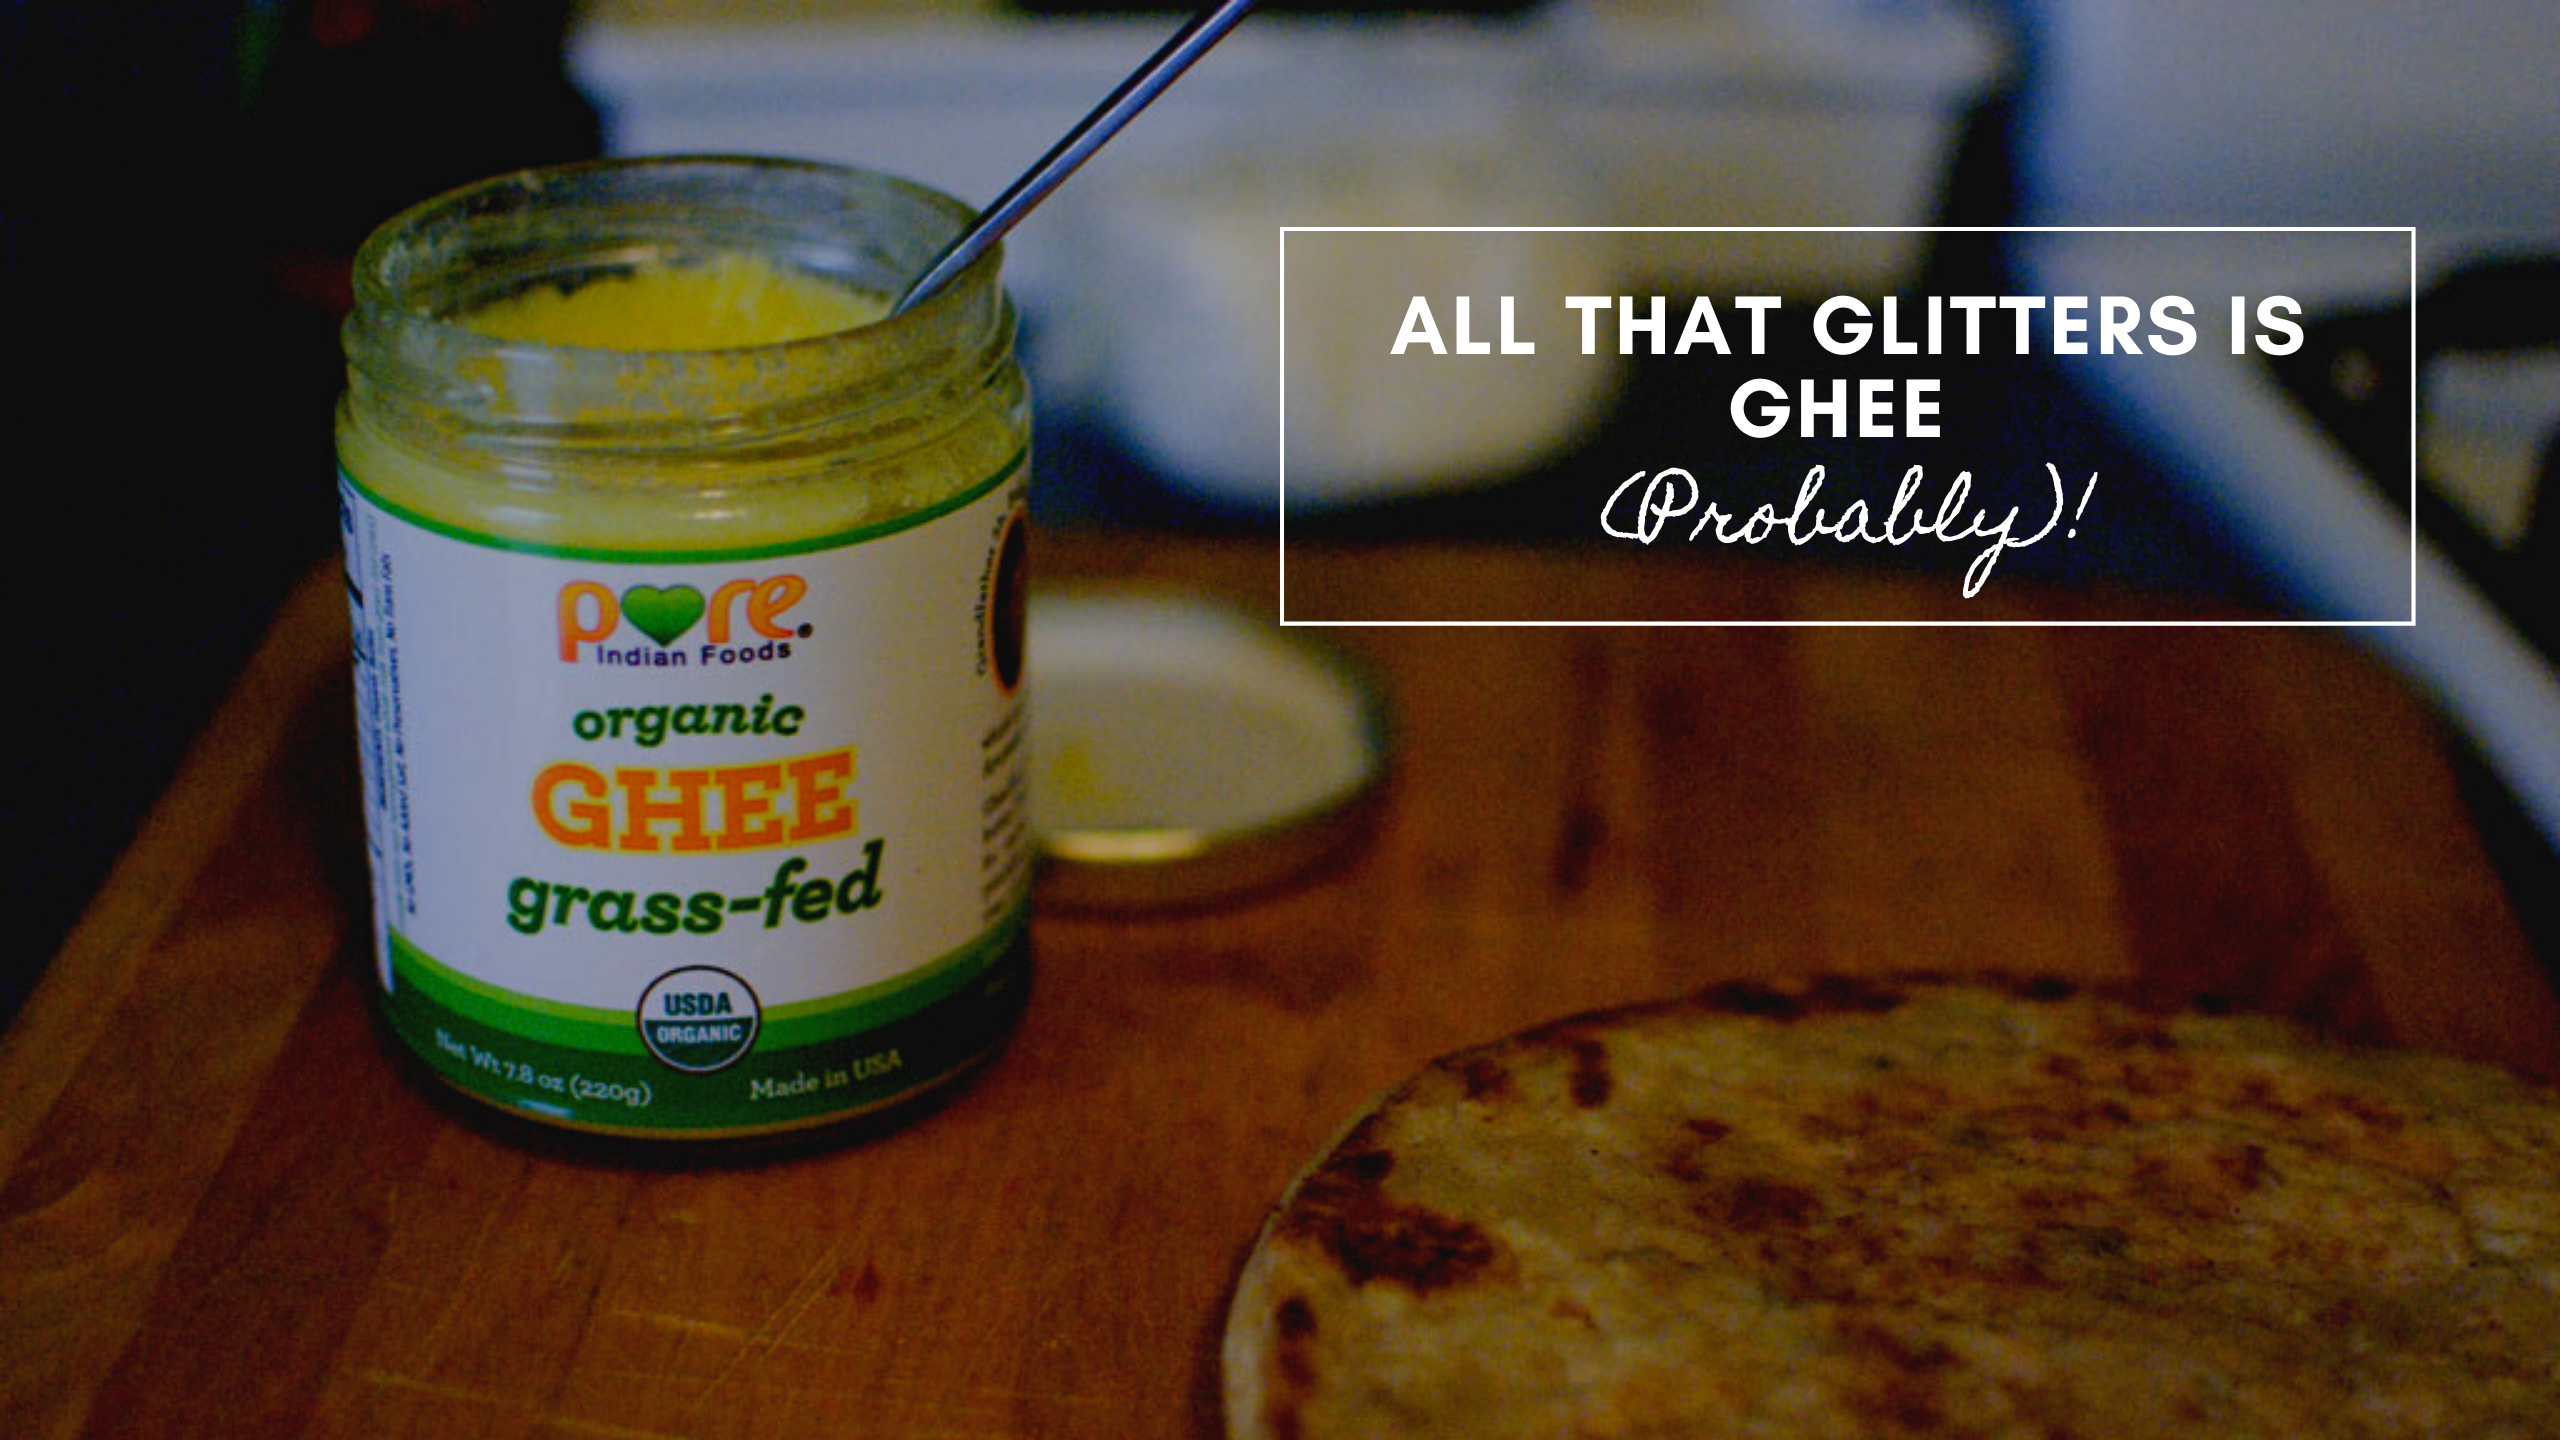 All That Glitters is Ghee (probably)!